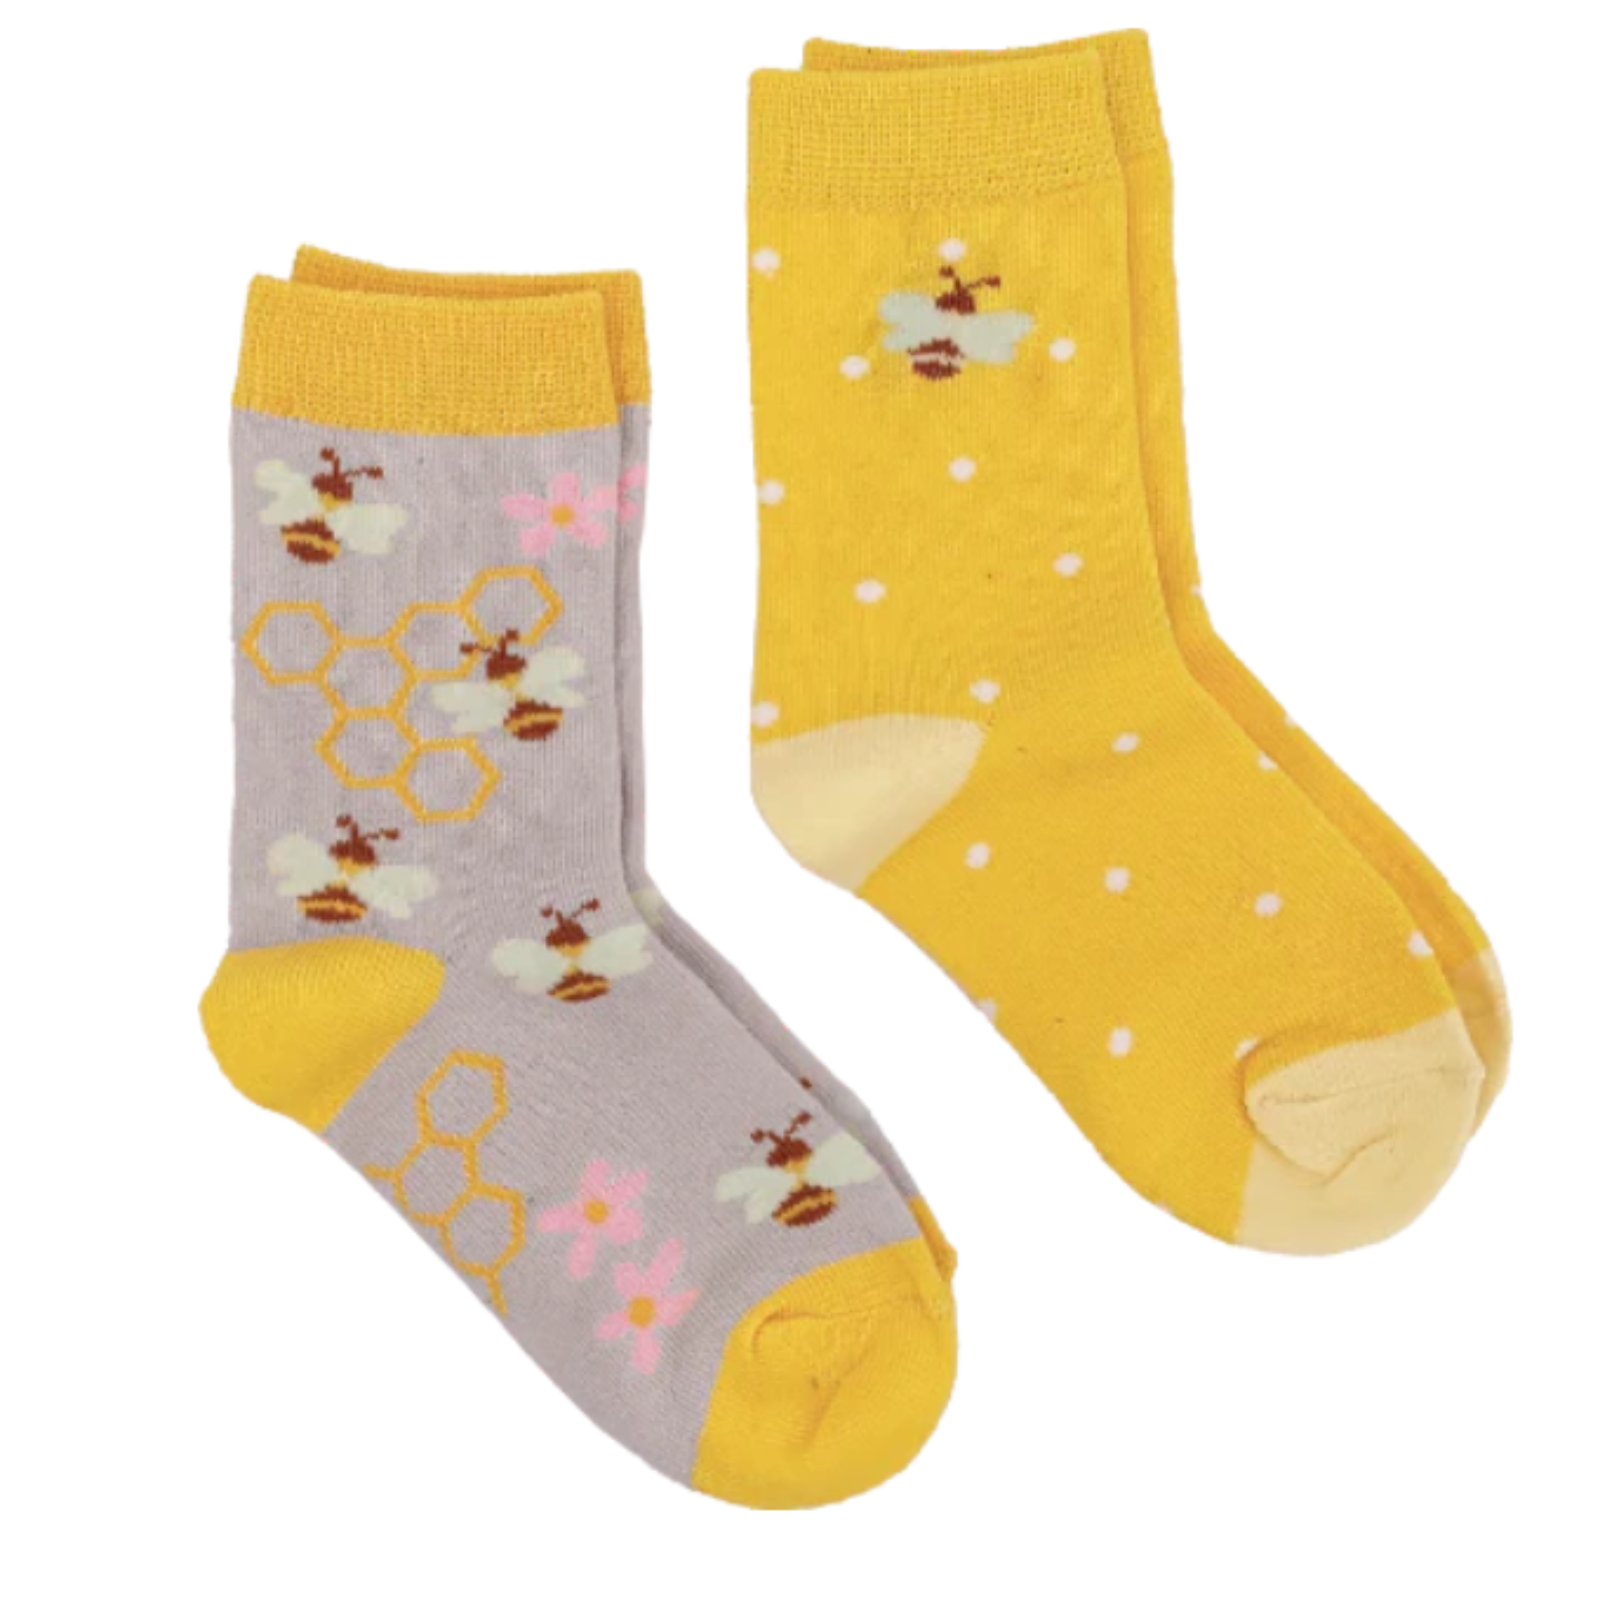 Sock Harbor Bees 2-pack kids' crew socks featuring gray sock with images of bees, flowers, and honeycomb and yellow sock with bee and white polka dots. Socks shown flat on display. 